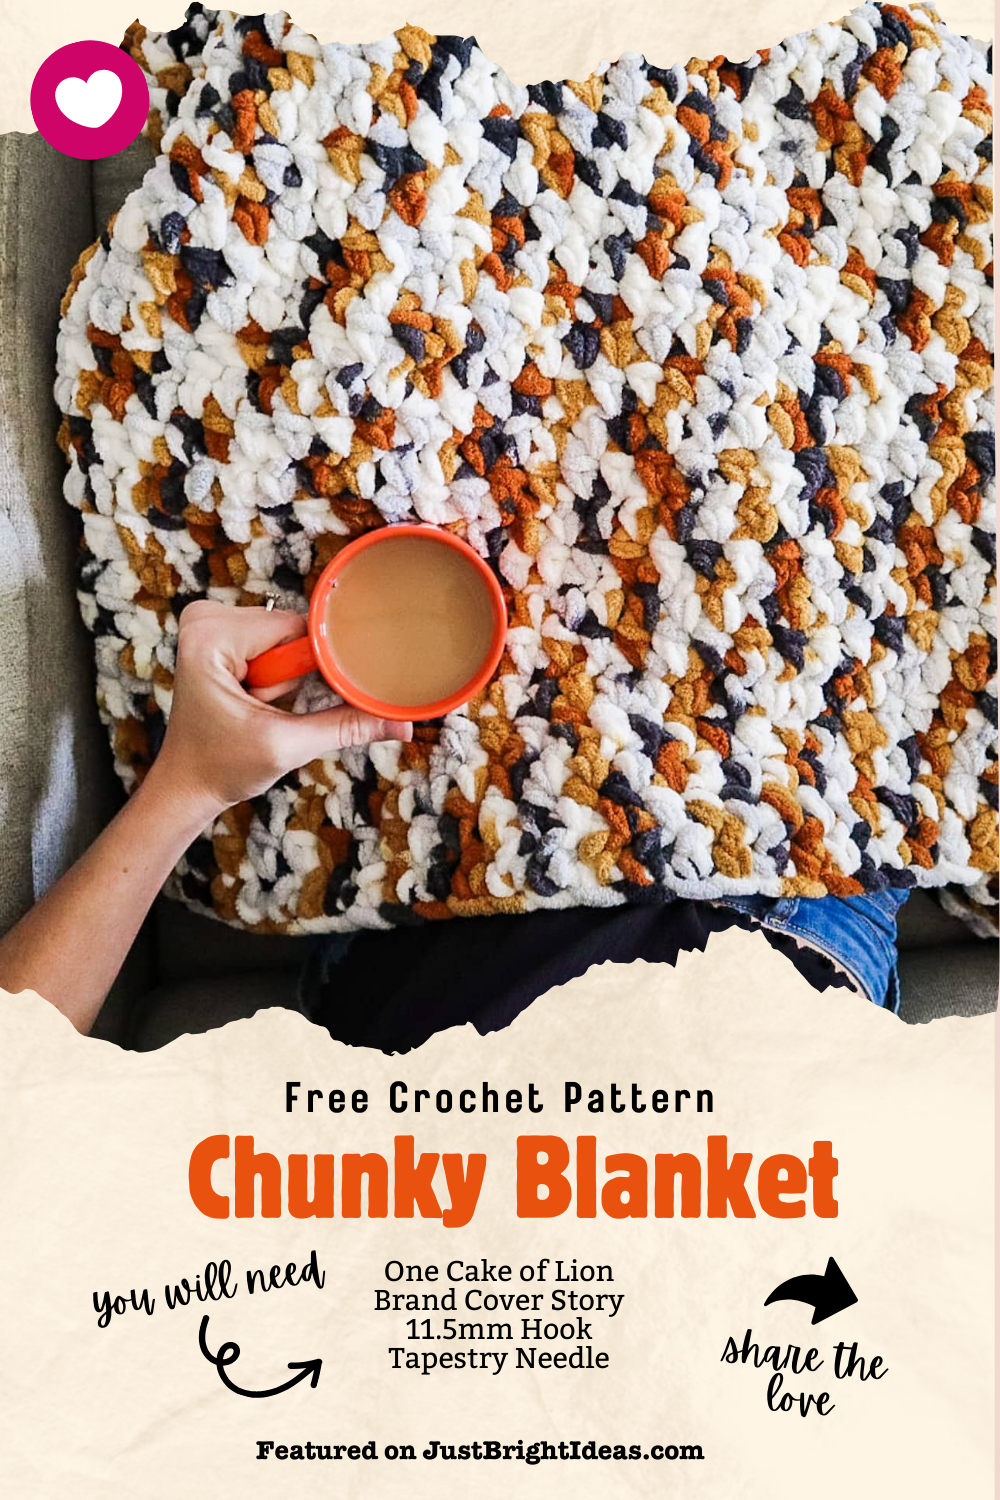 🧶✨ Newbie-friendly alert! ✨🧶 Whip up this cozy, chunky blanket with just ONE cake of yarn! 🎁 The pattern is FREE and perfect for beginners. Makes a great gift! 🎉 #CrochetLove #FreePattern #ChunkyBlanket #DIYGift